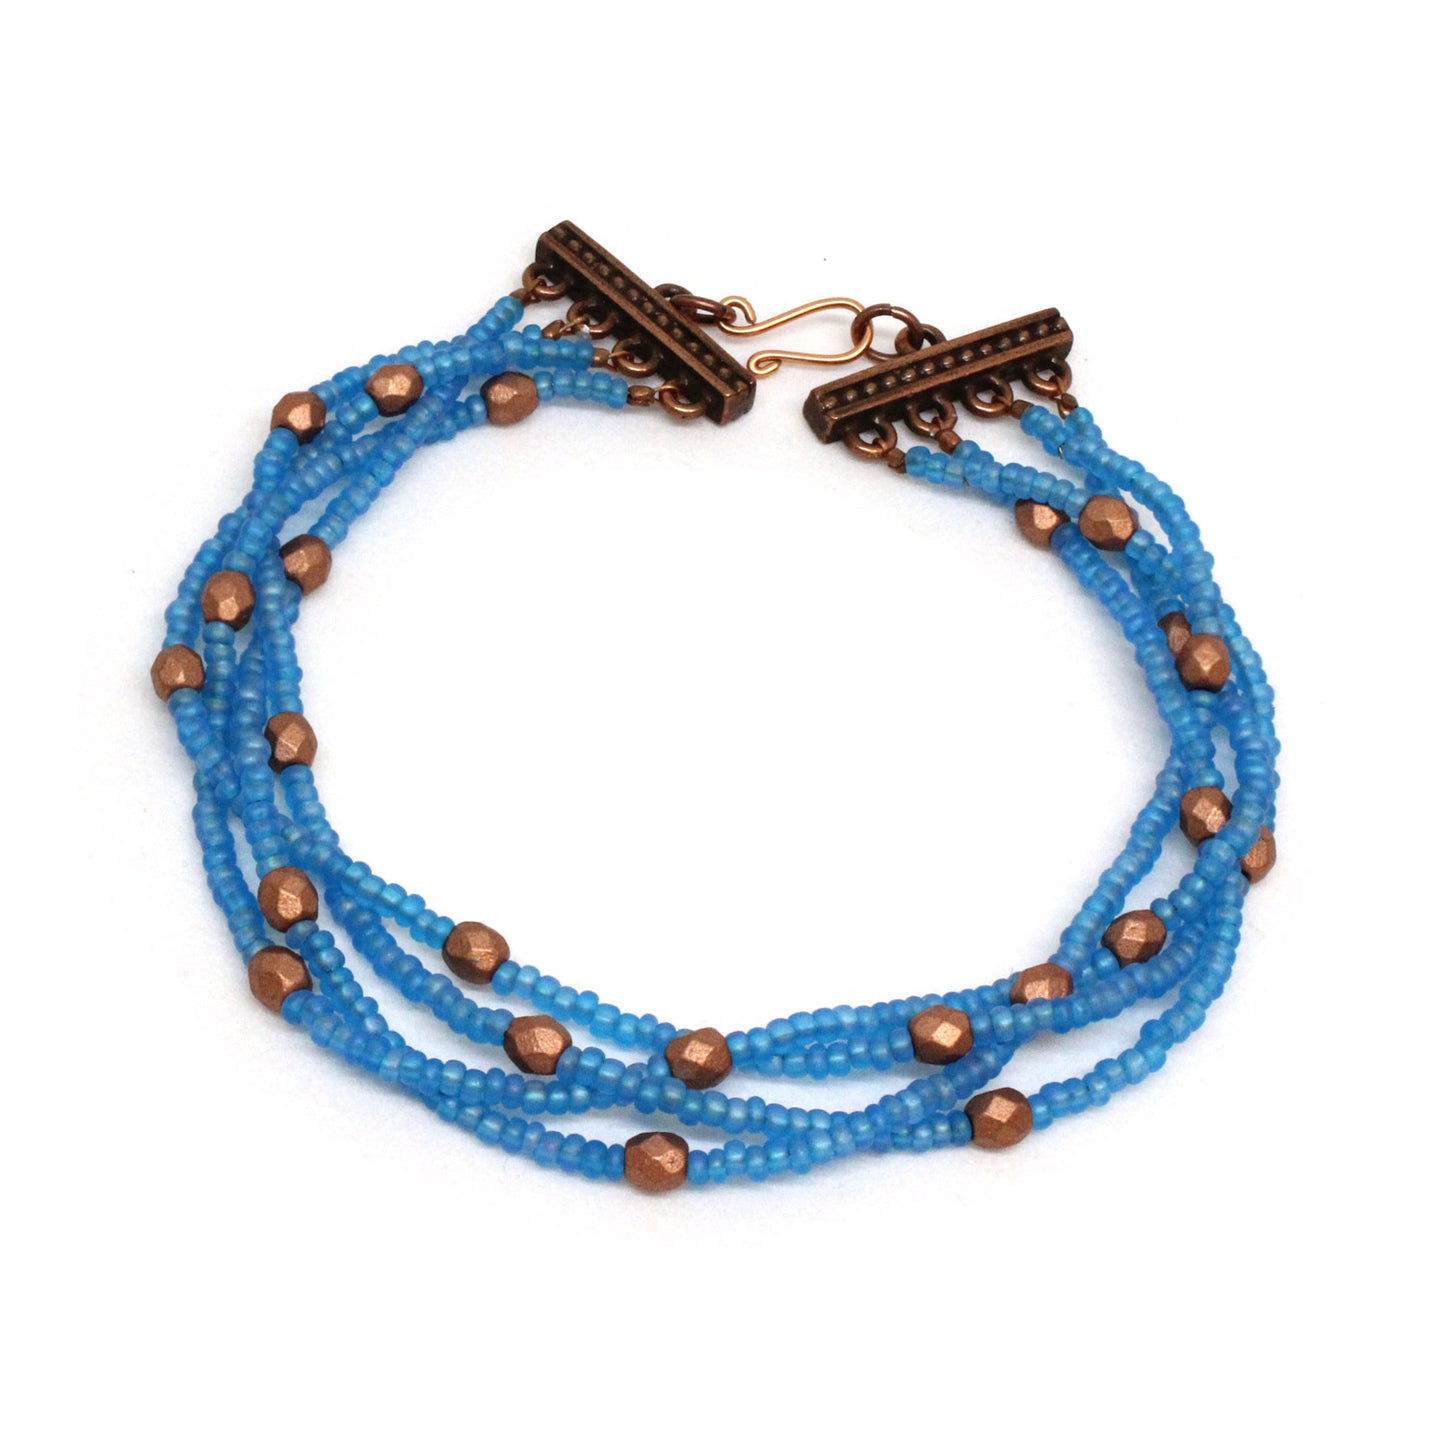 Braided Blue and Copper Bracelet / fits 6.5 to 7 Inch wrist size / copper wire hook and ring closure